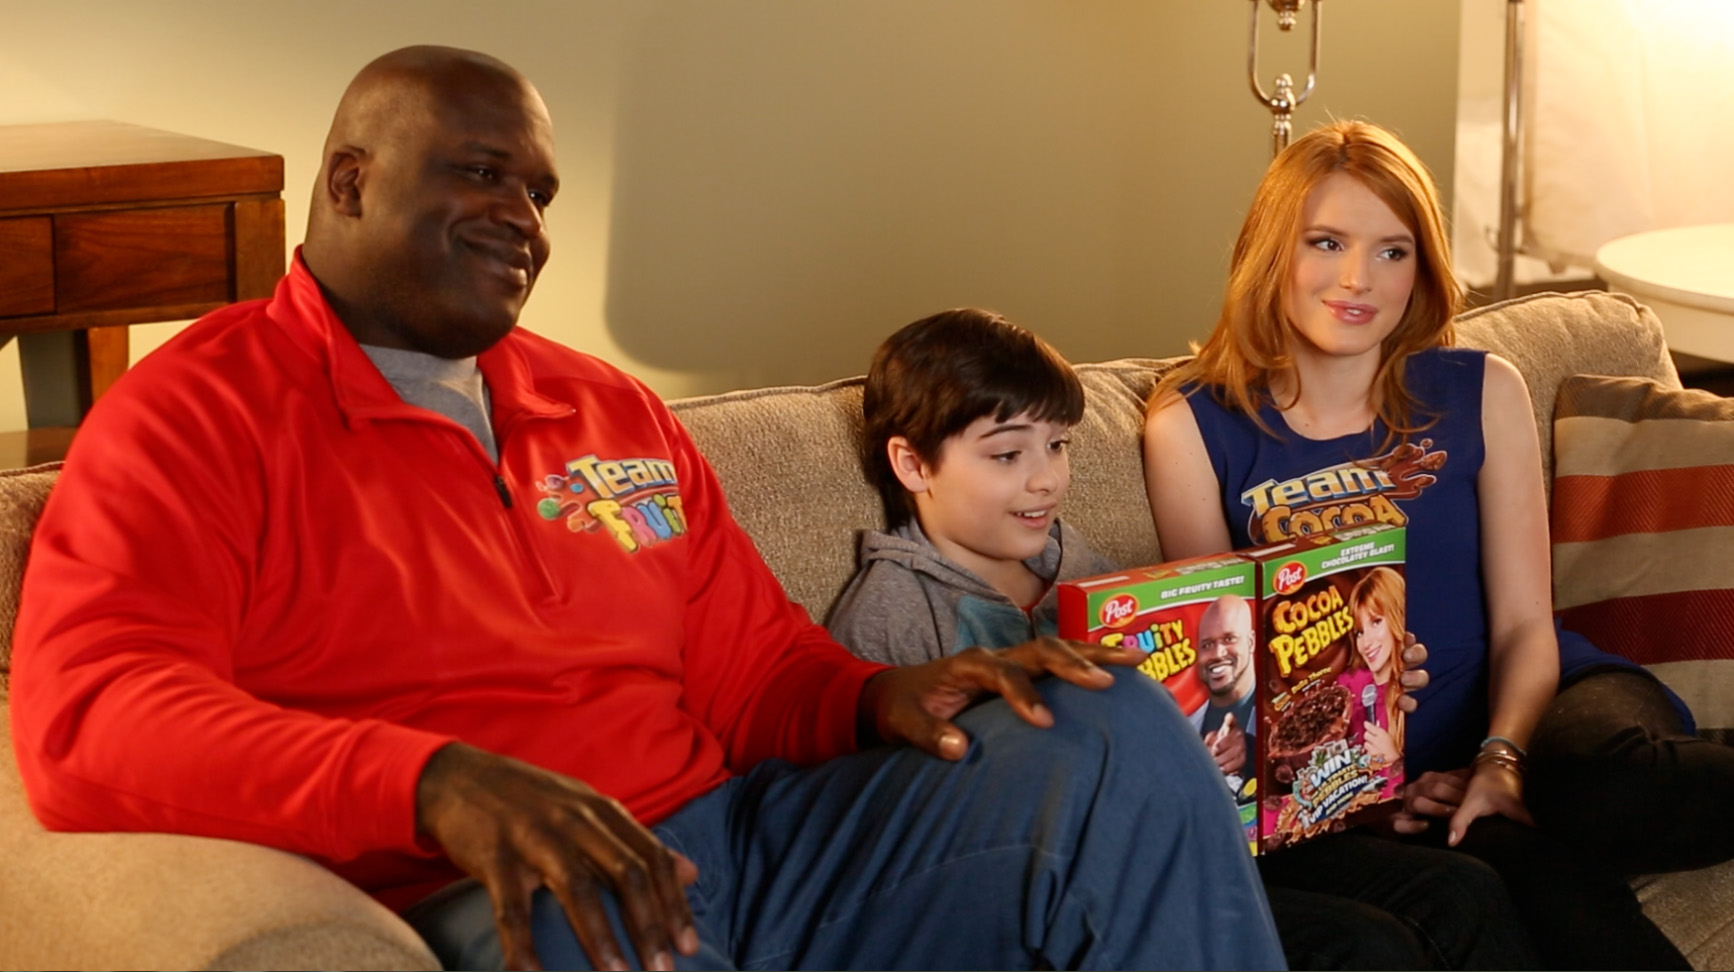 Choose your side! Will you join Shaq on Team Fruity or align with Bella to root on Team Cocoa? The choice is yours!